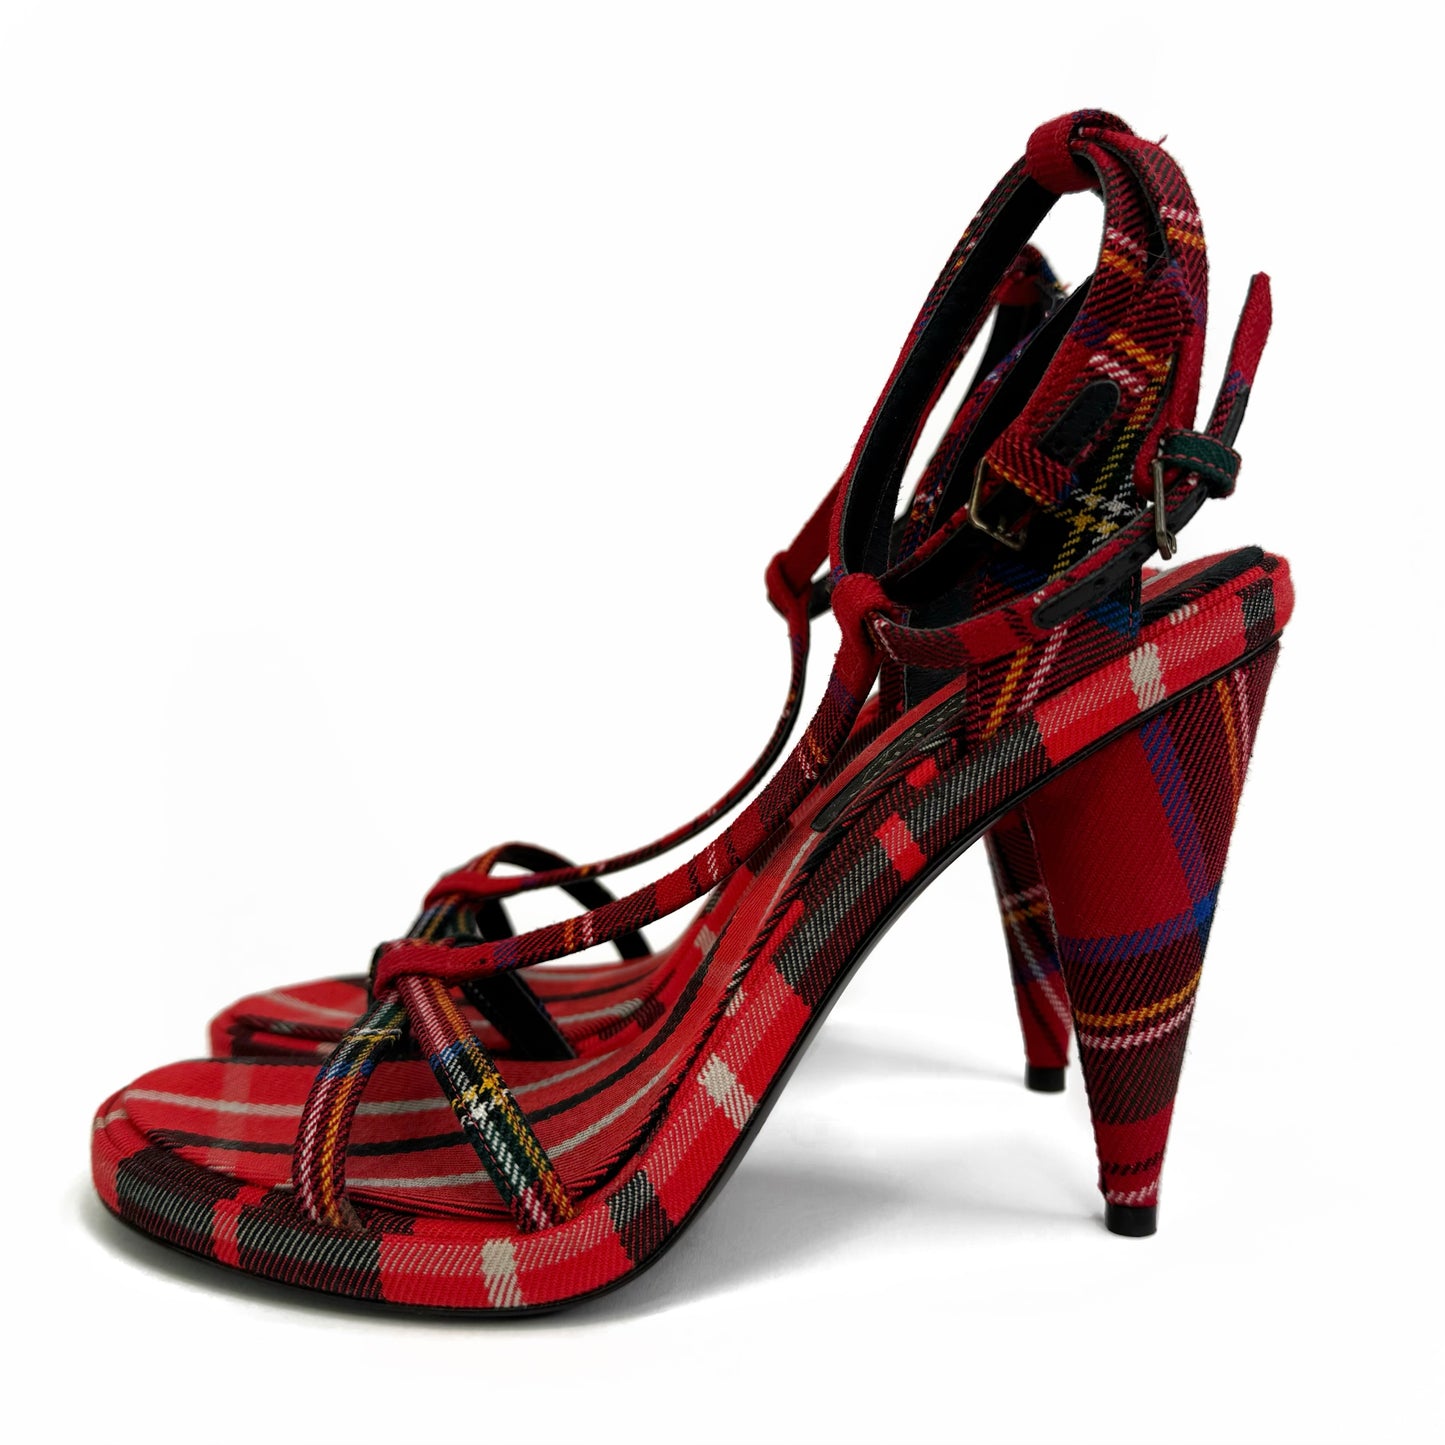 Burberry Checkered Canvas Ankle Strap Heels Sandals